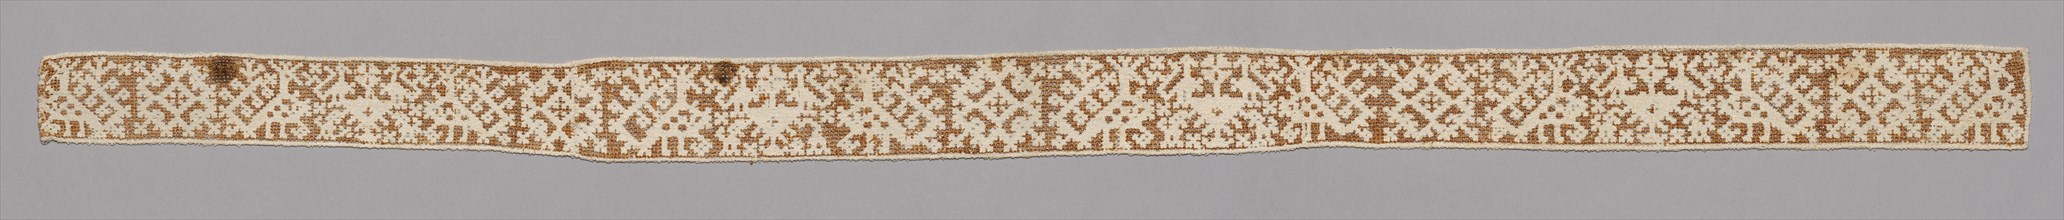 Needlepoint (Drawnwork) Lace Band, 16th-17th century. Italy, Sicily, 16th-17th century. Lace,